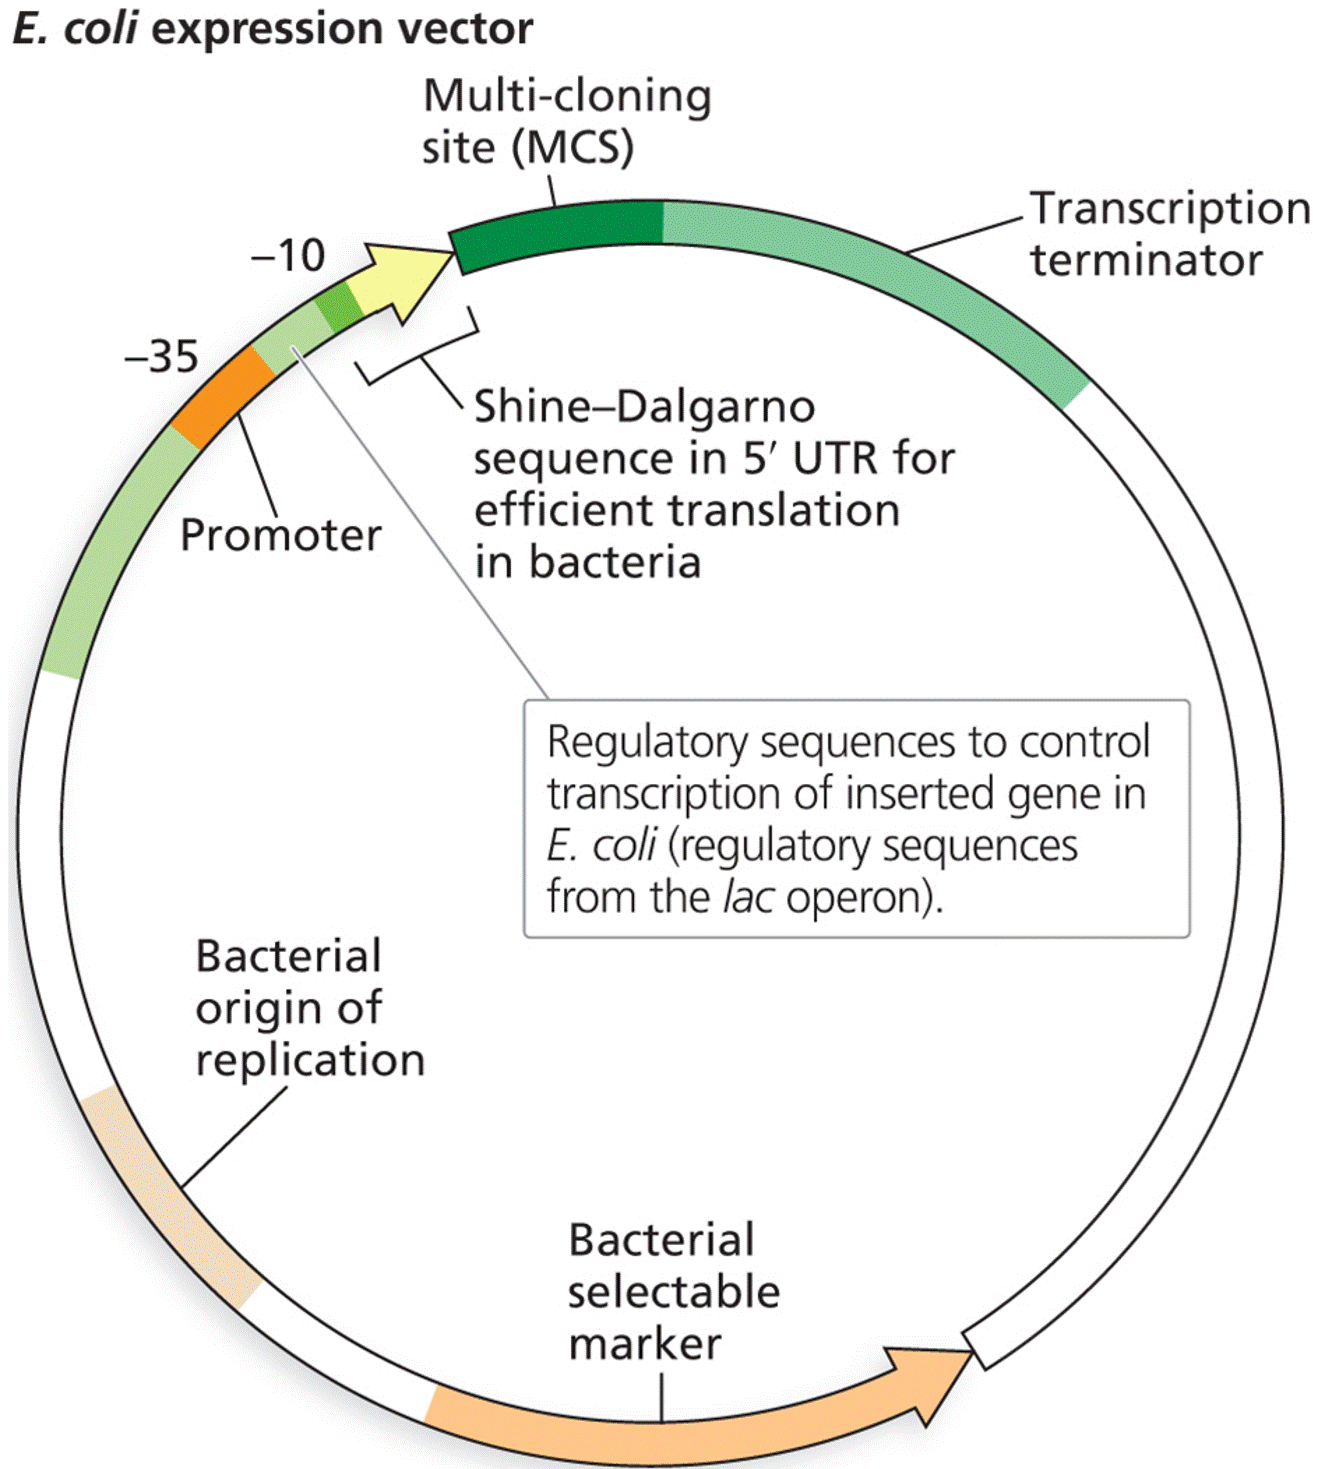 Typical features of expression vectors for E. coli